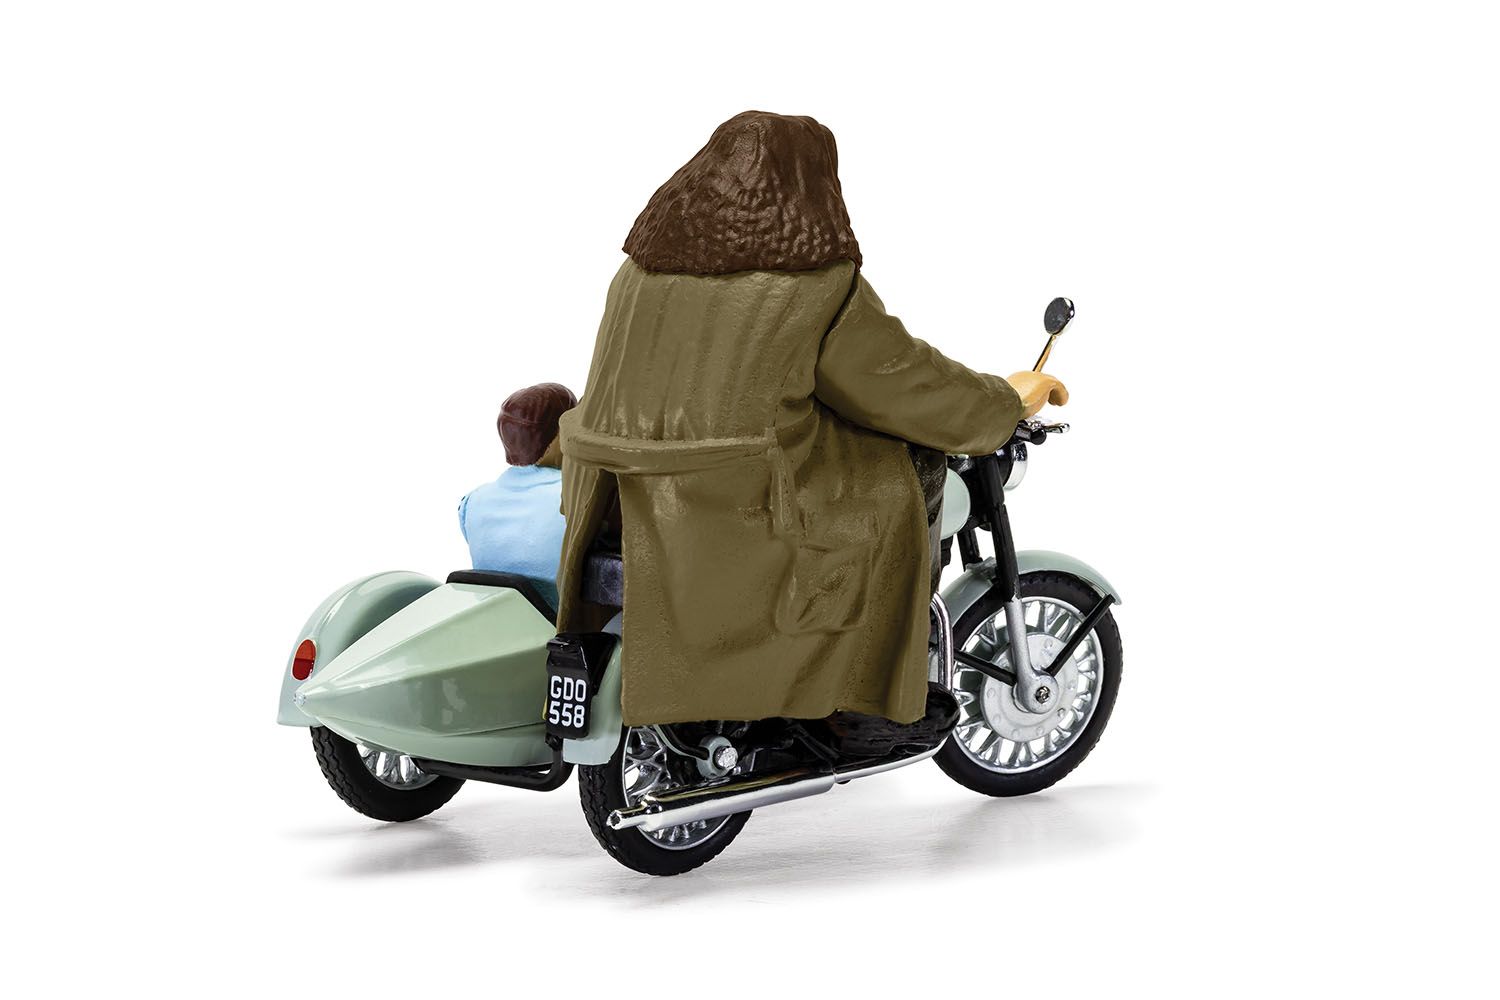 CC99727 | Harry Potter Hagrid Motorcycle and - diecast models